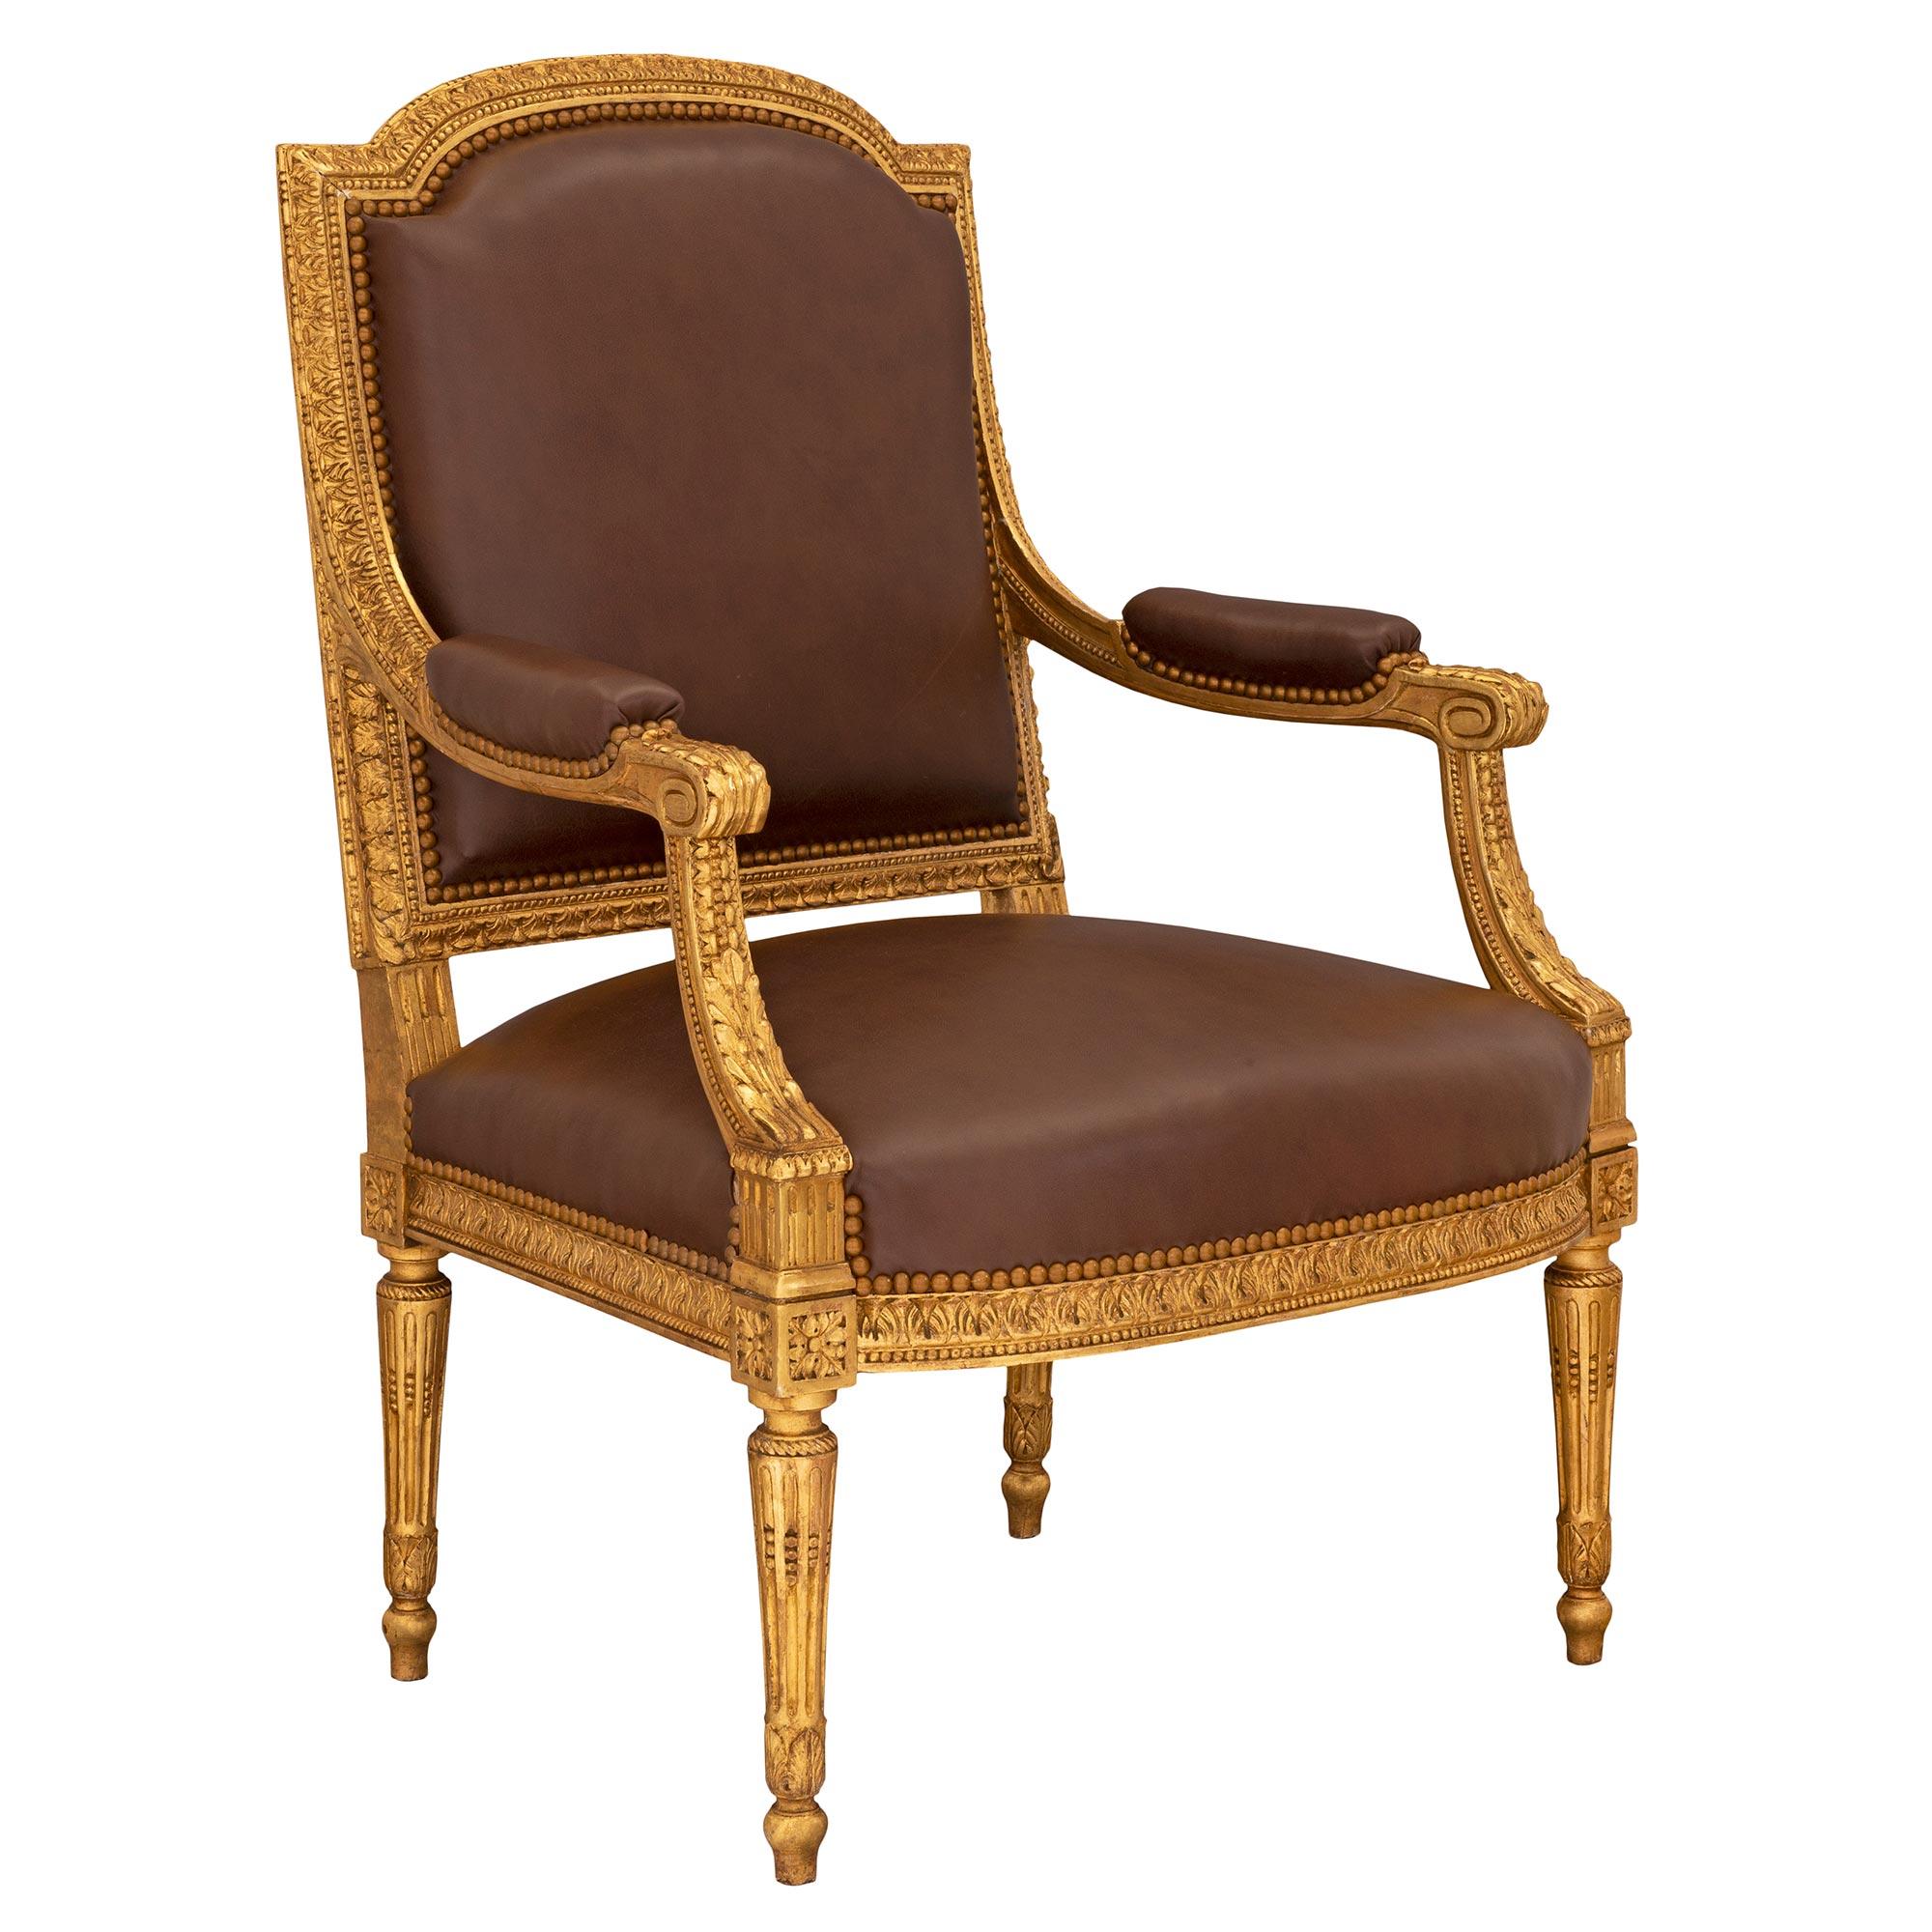 A striking and most elegant complete set of four French 19th century Louis XVI st. giltwood armchairs. Each chair is raised by circular tapered fluted legs with topie shaped feet and finely carved leaves and a charming wrap around twisted rope band.